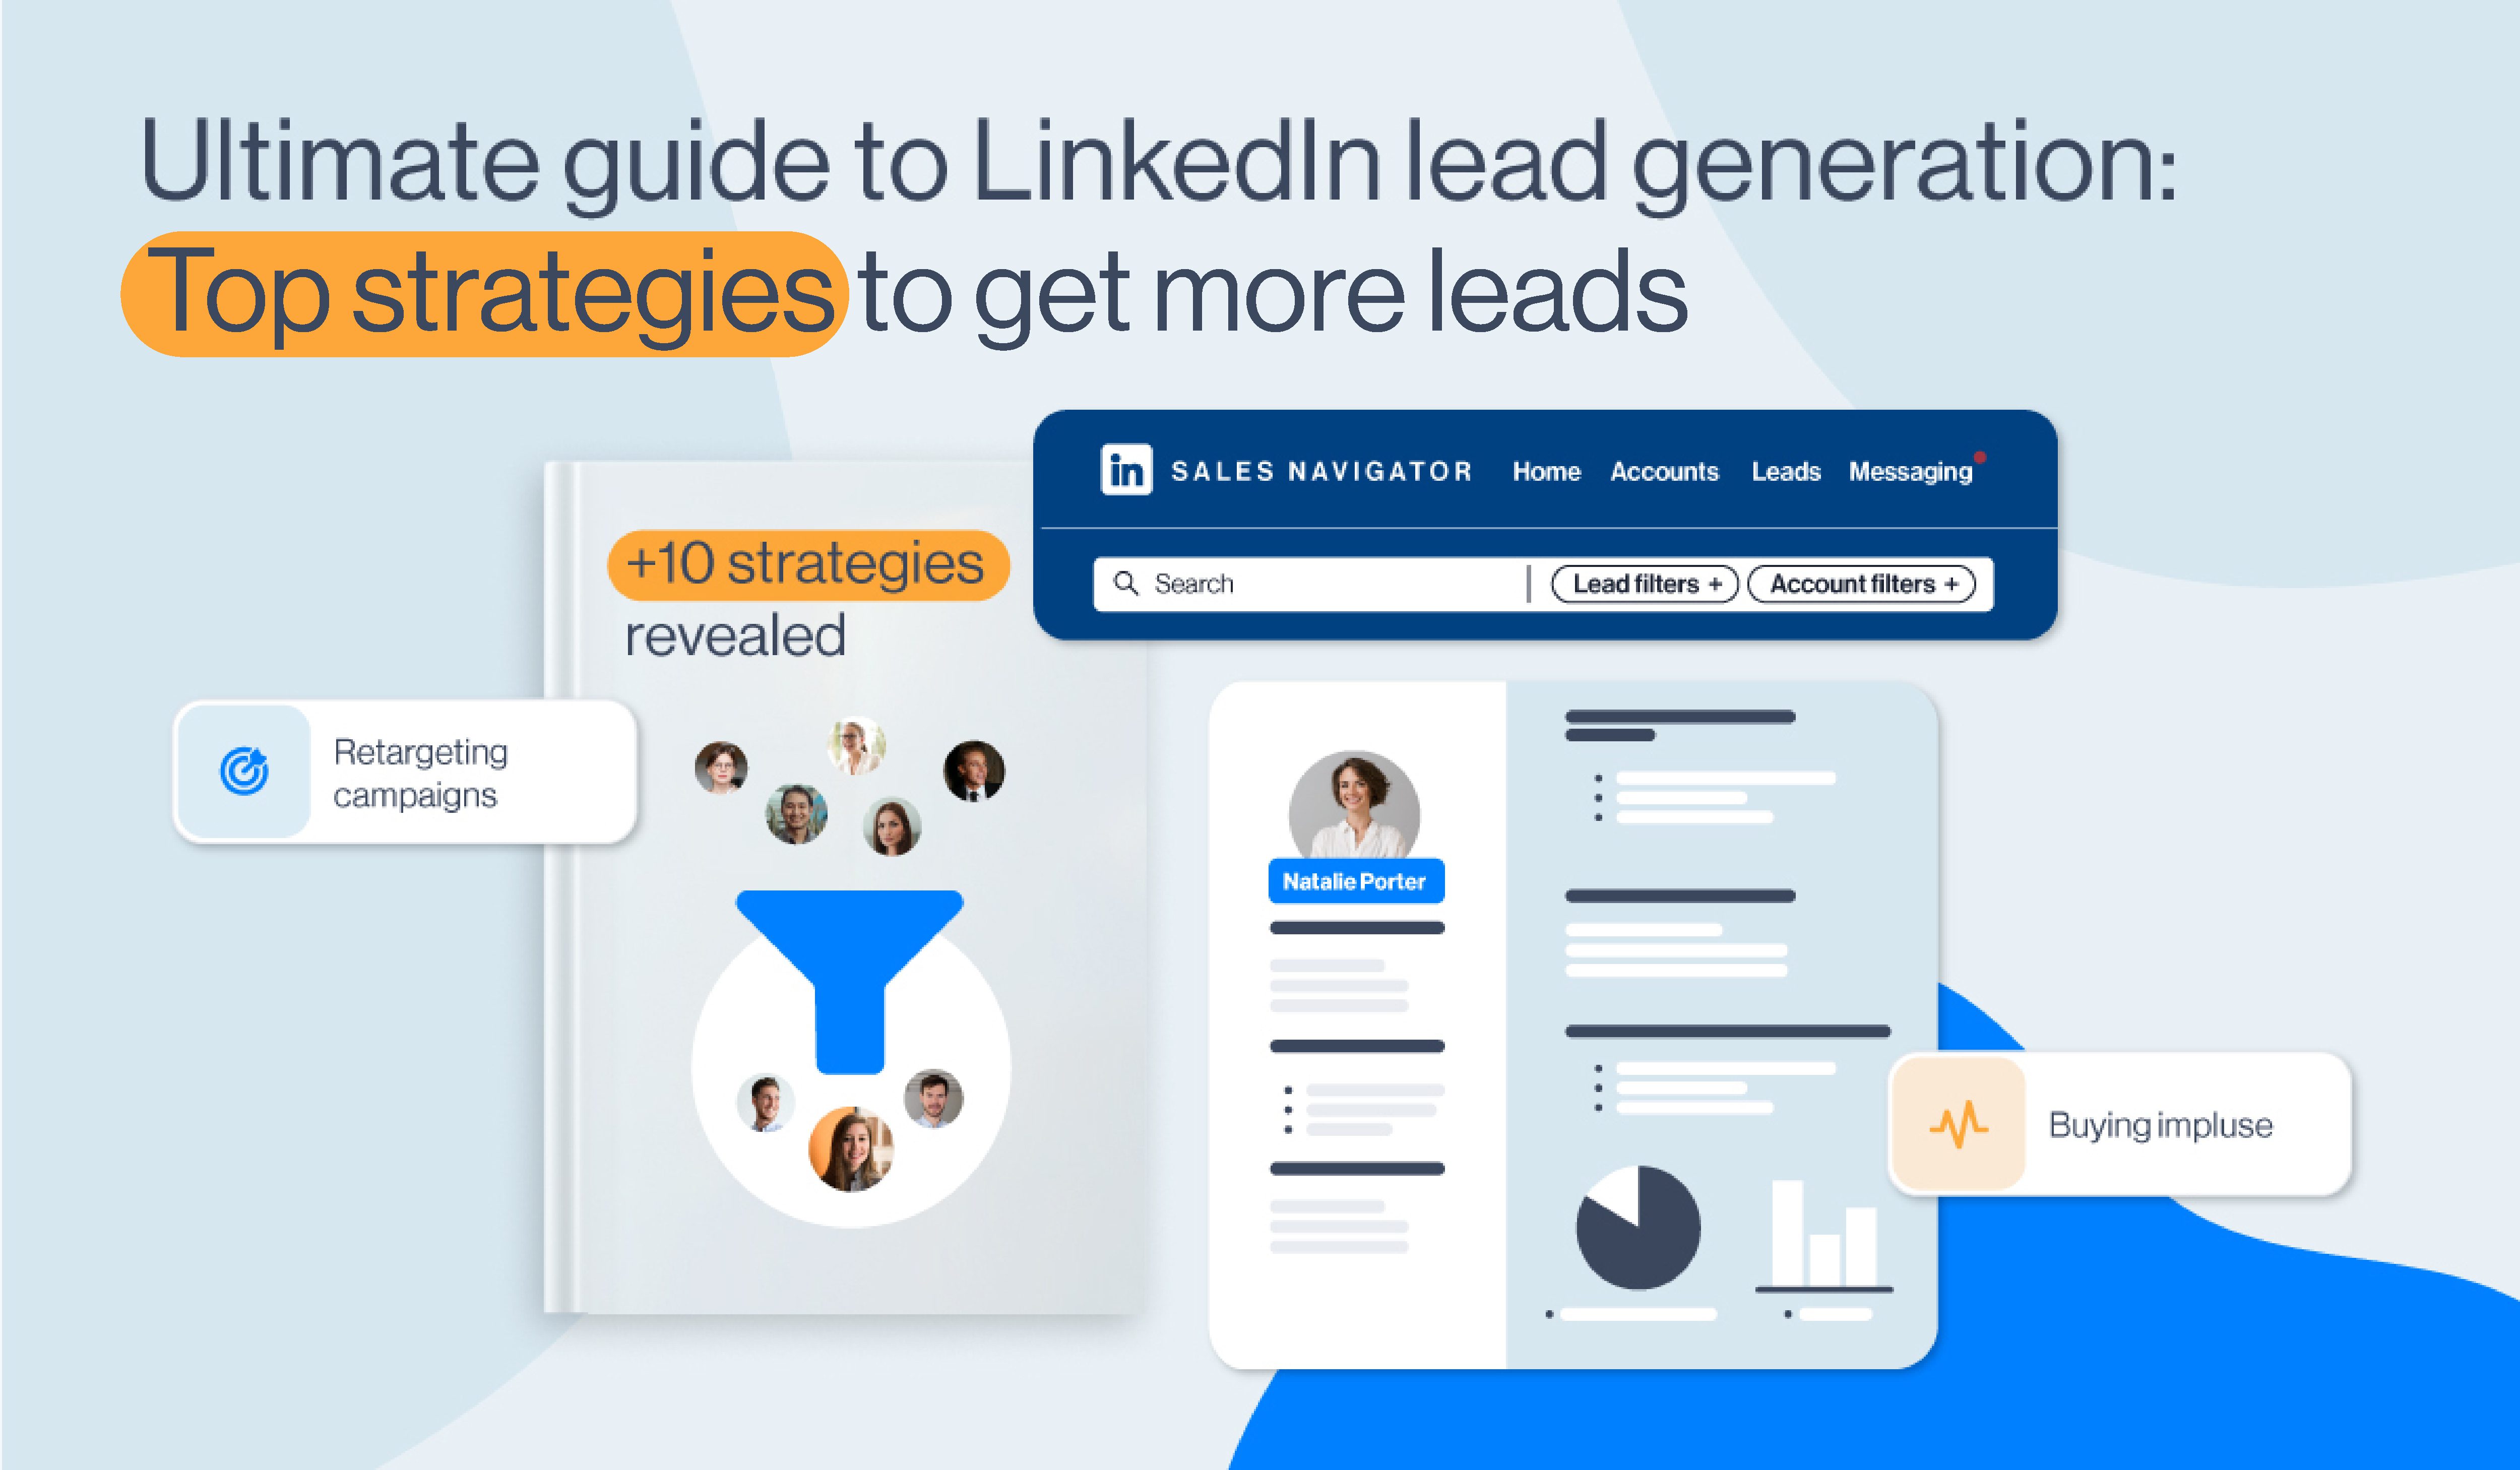 The ultimate guide to building a LinkedIn presence